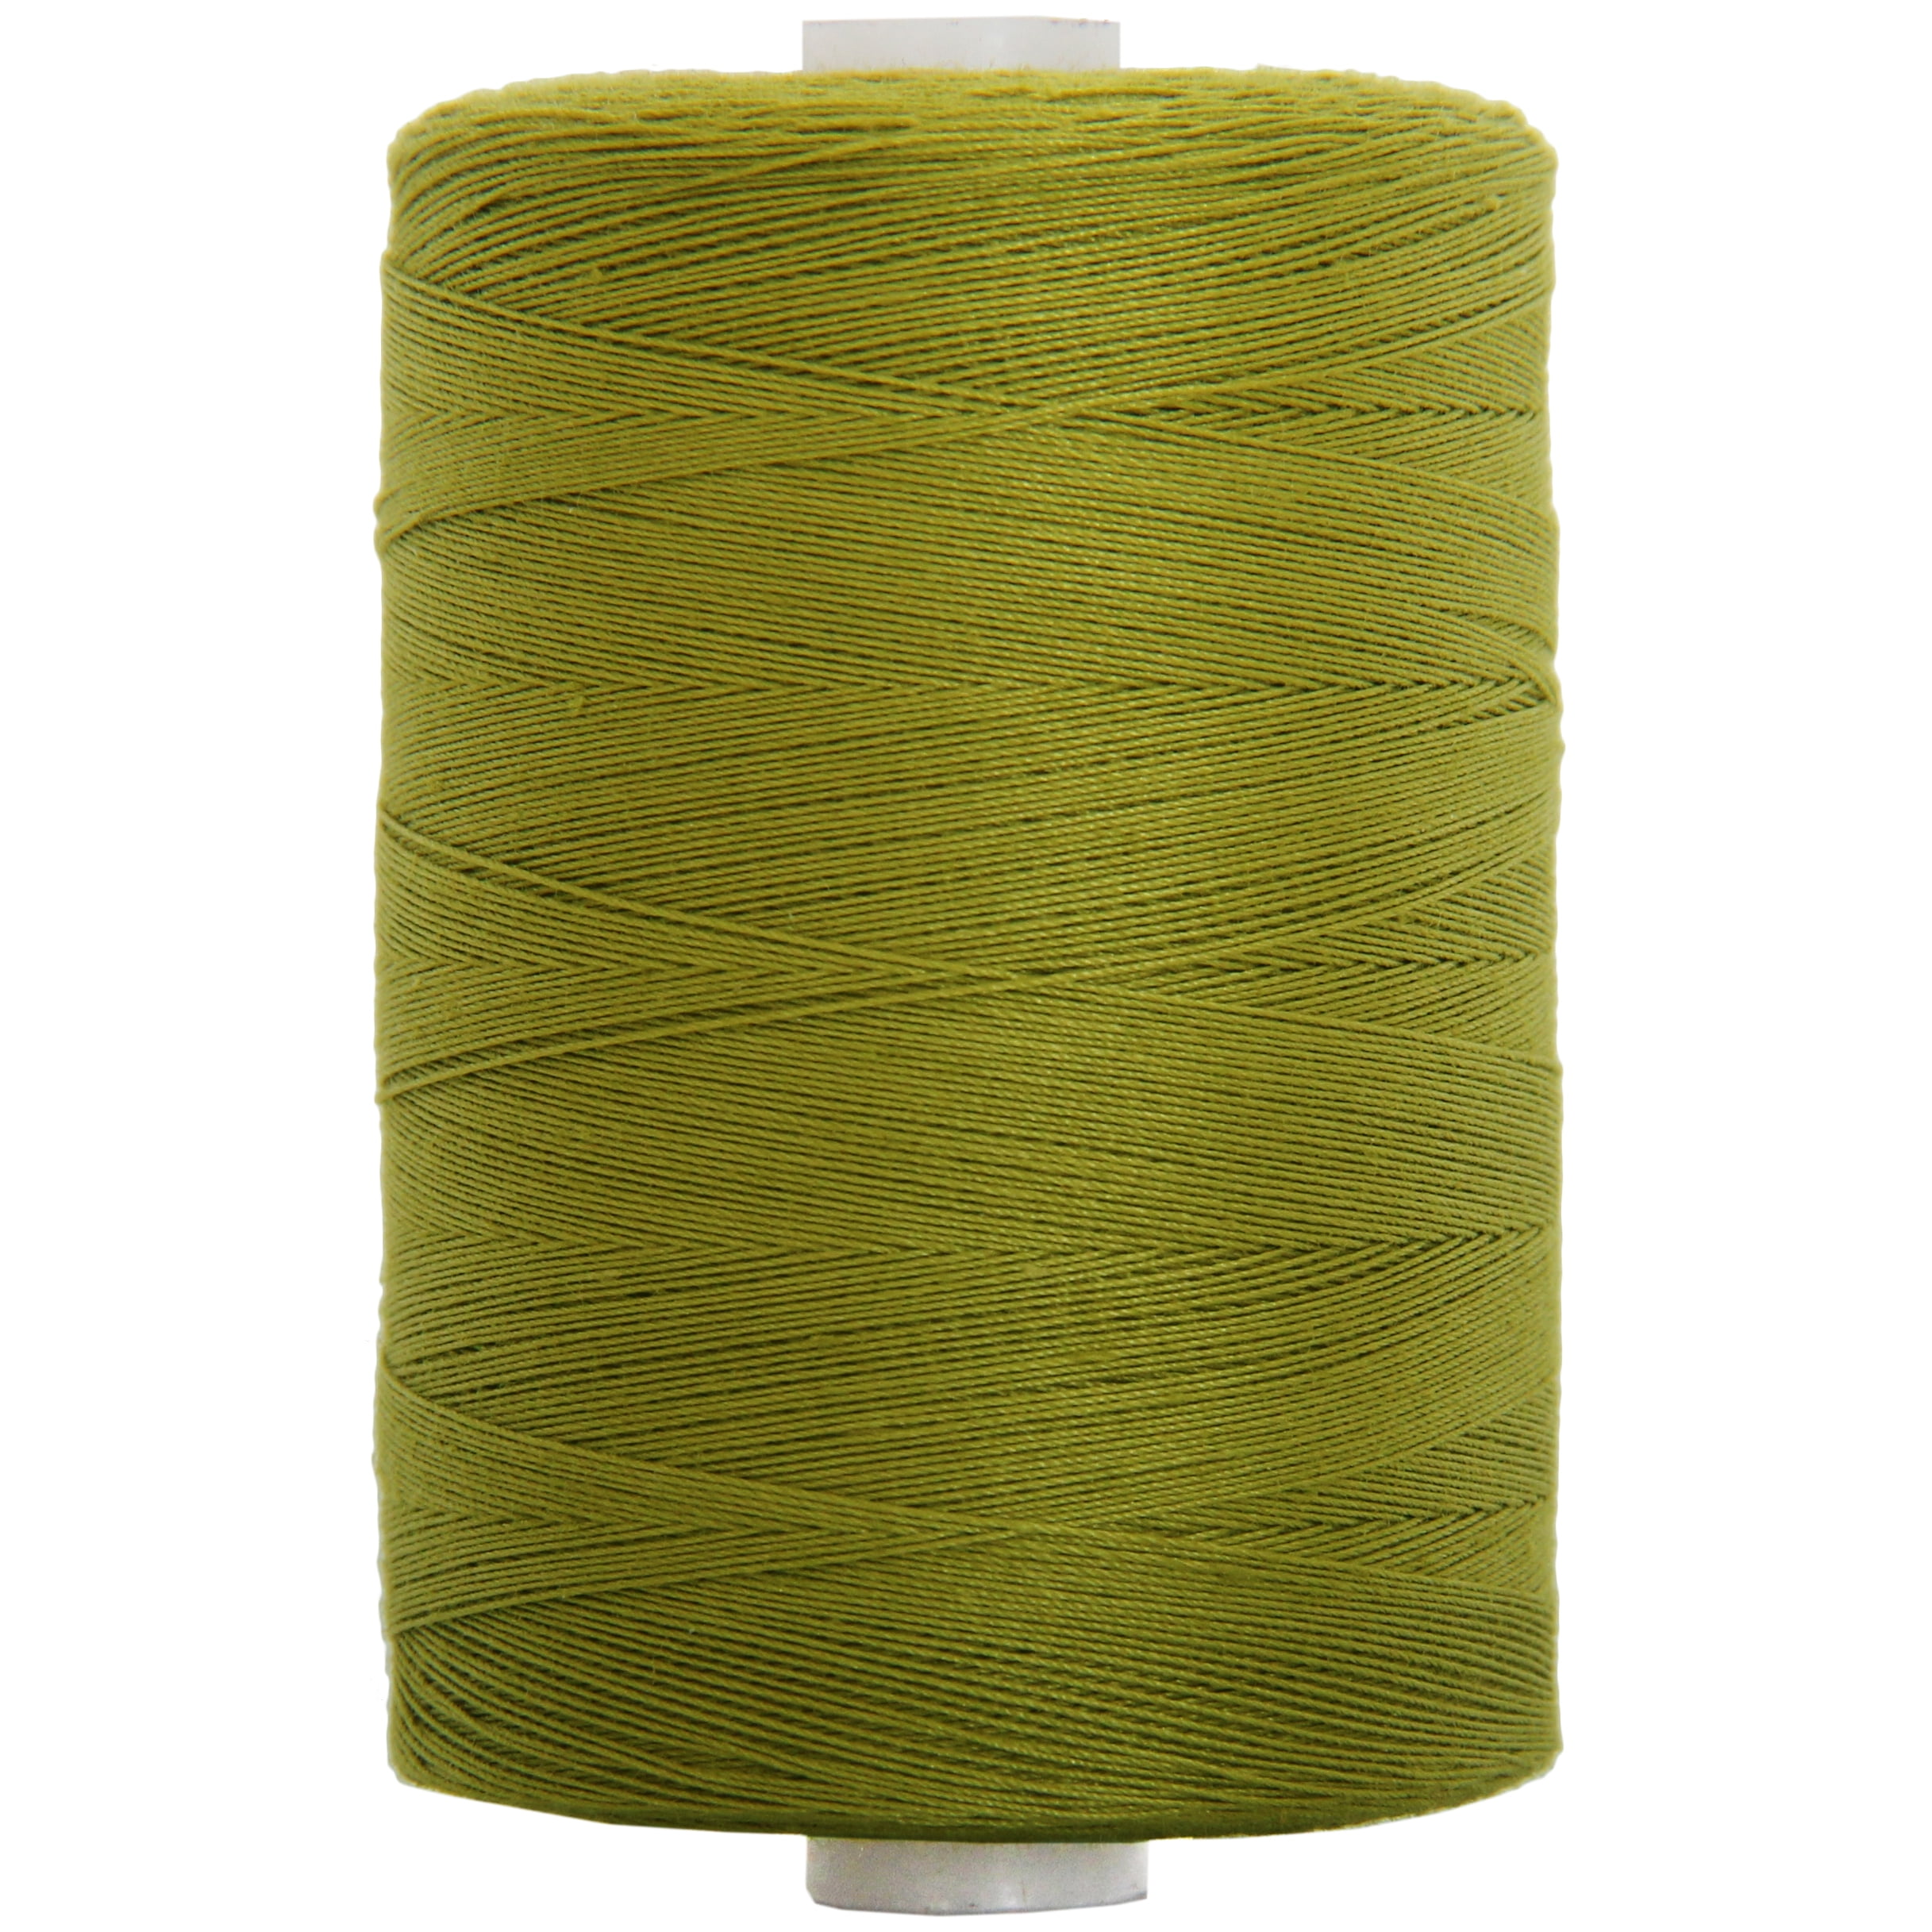 For Quilting Color HOLLY GREEN 1000M Spools 50/3 Weight Threadart 100% Cotton Thread Sewing and Serging 50 Colors Available